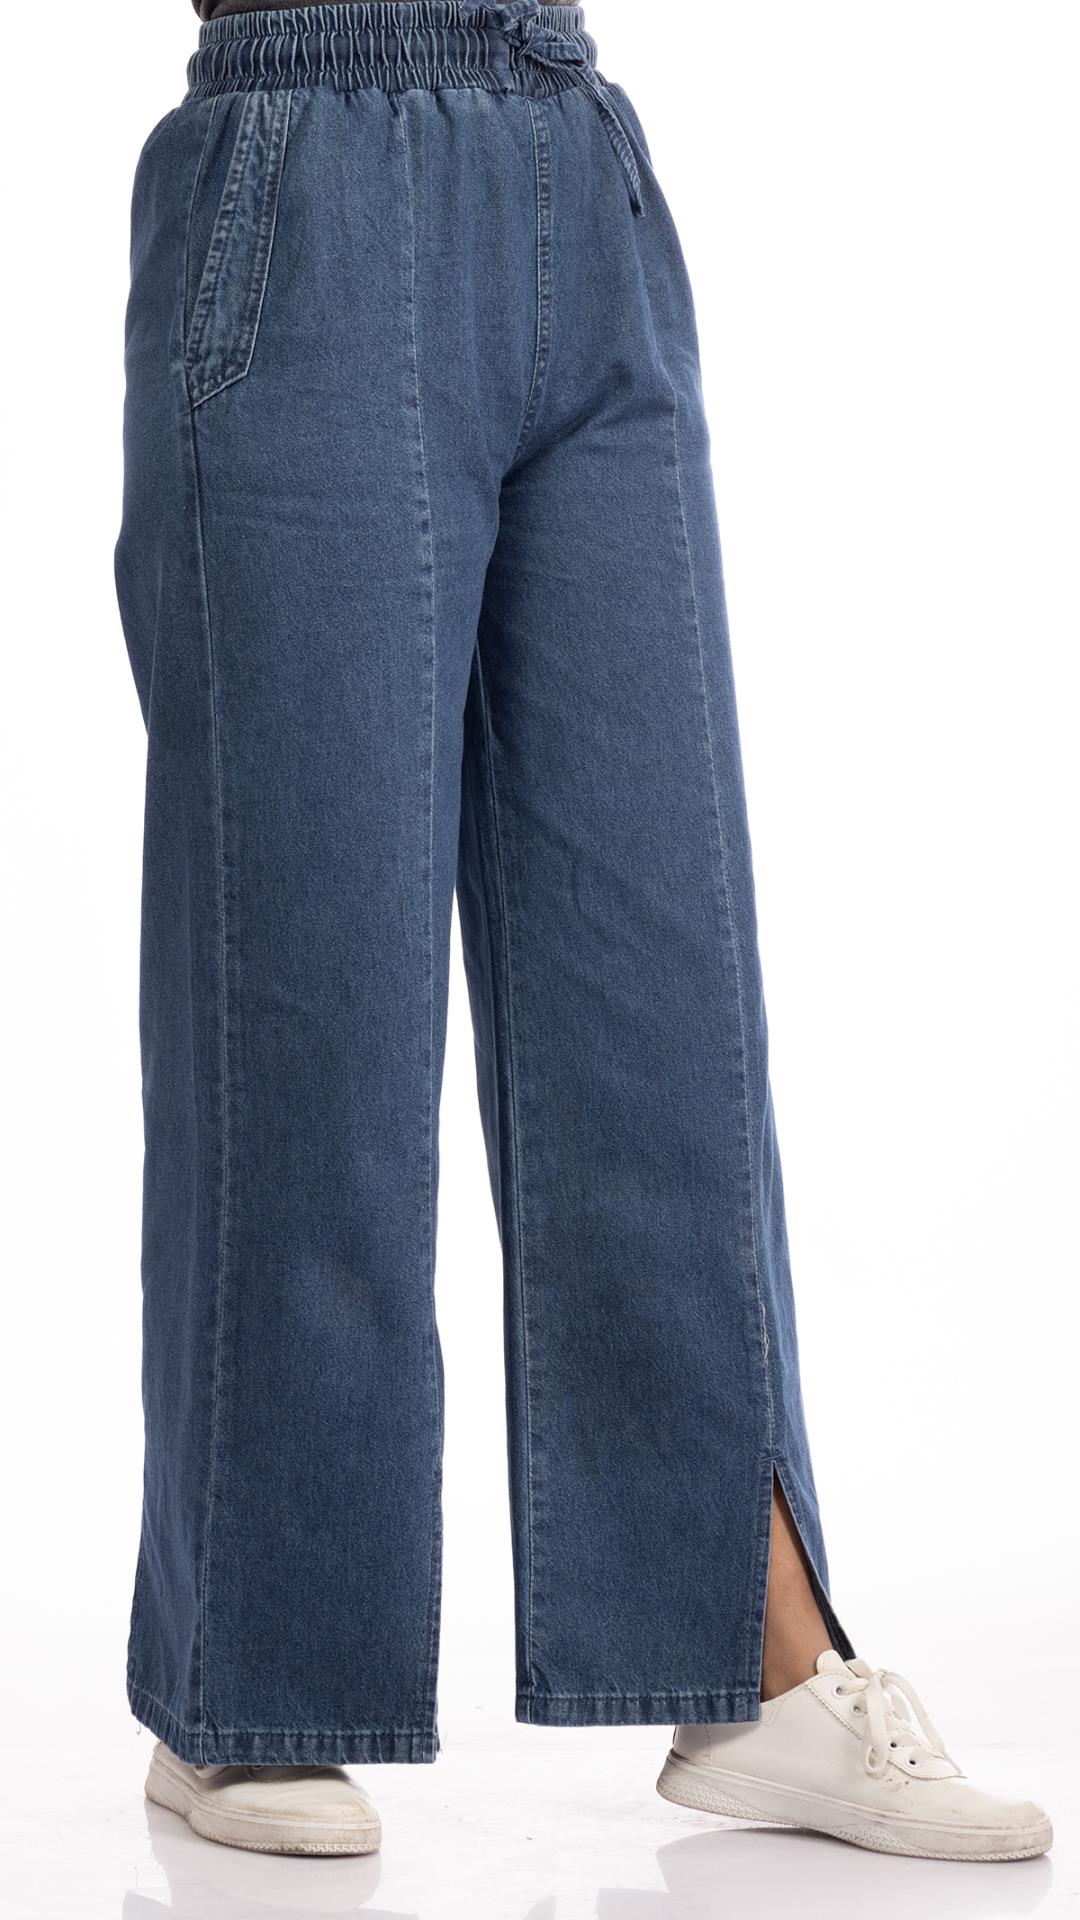 Jeans with a small slit on the front and back